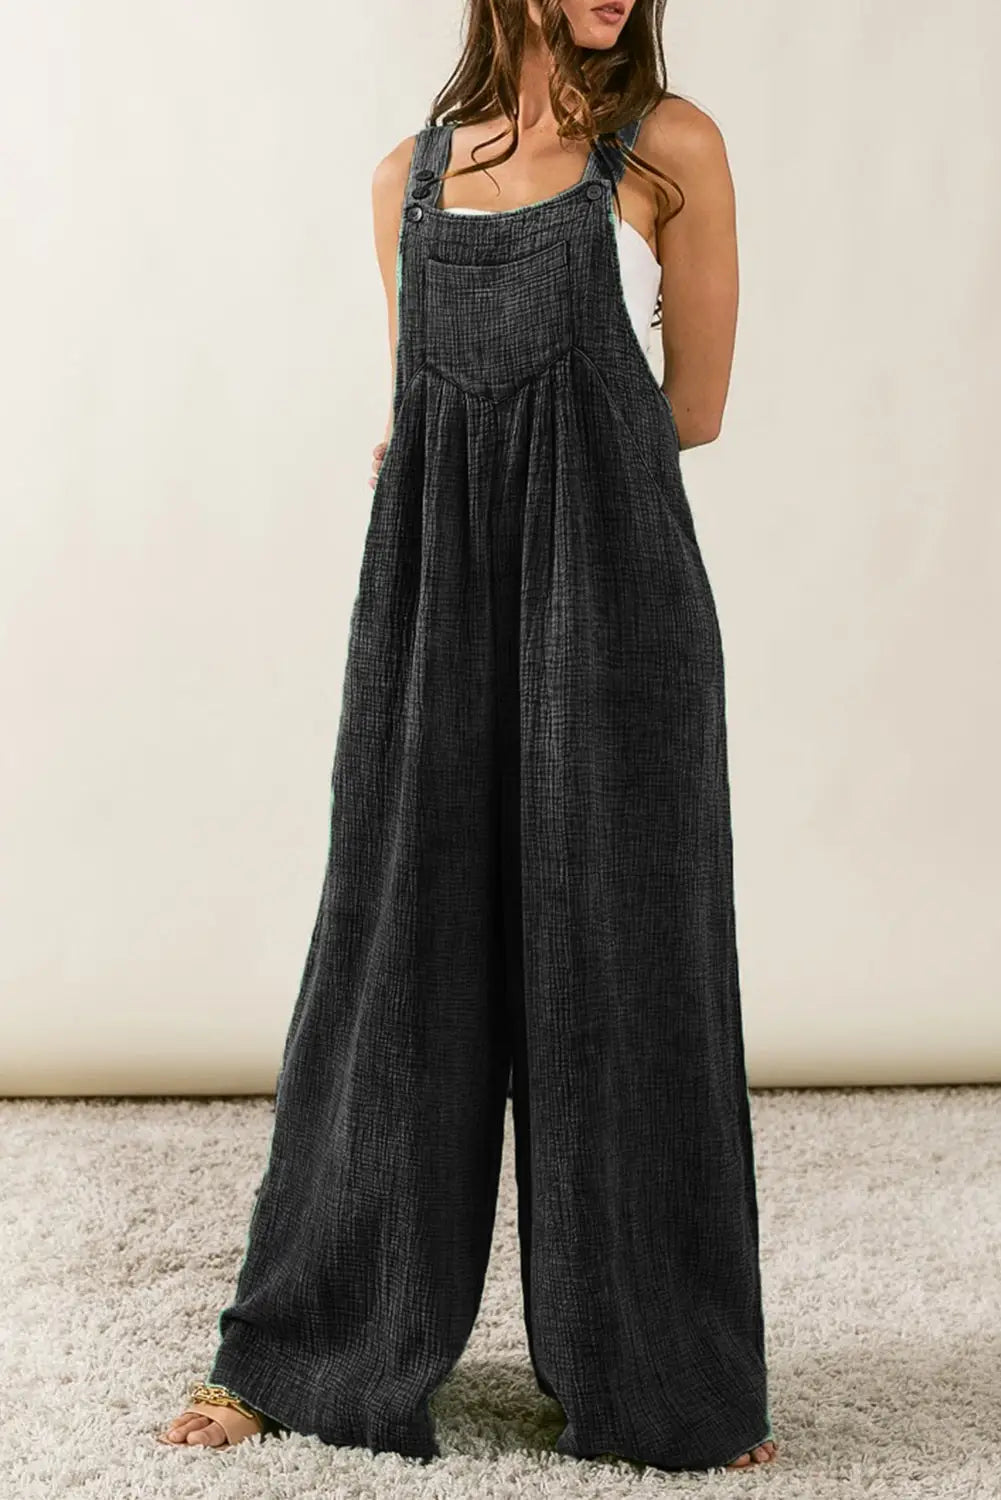 Black textured wide leg overalls - s / 100% cotton - jumpsuits & rompers